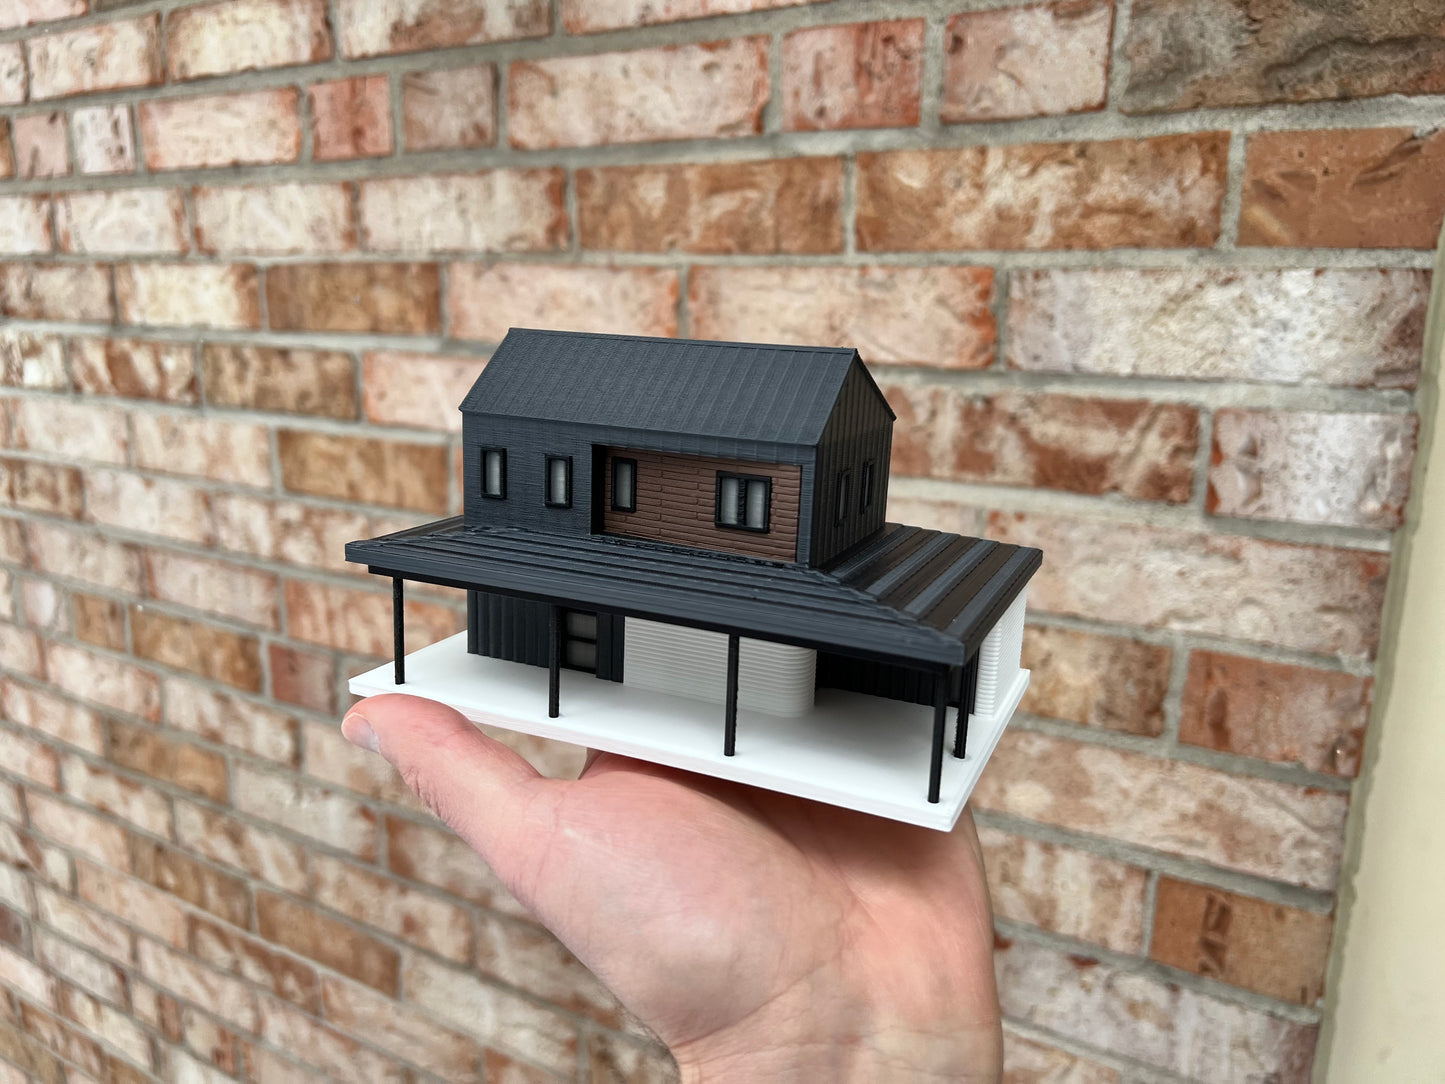 Custom Model of Your Small House, Scale Model Home or Office Building, Realtor Closing Gift, Fast Delivery, Optional Lighting